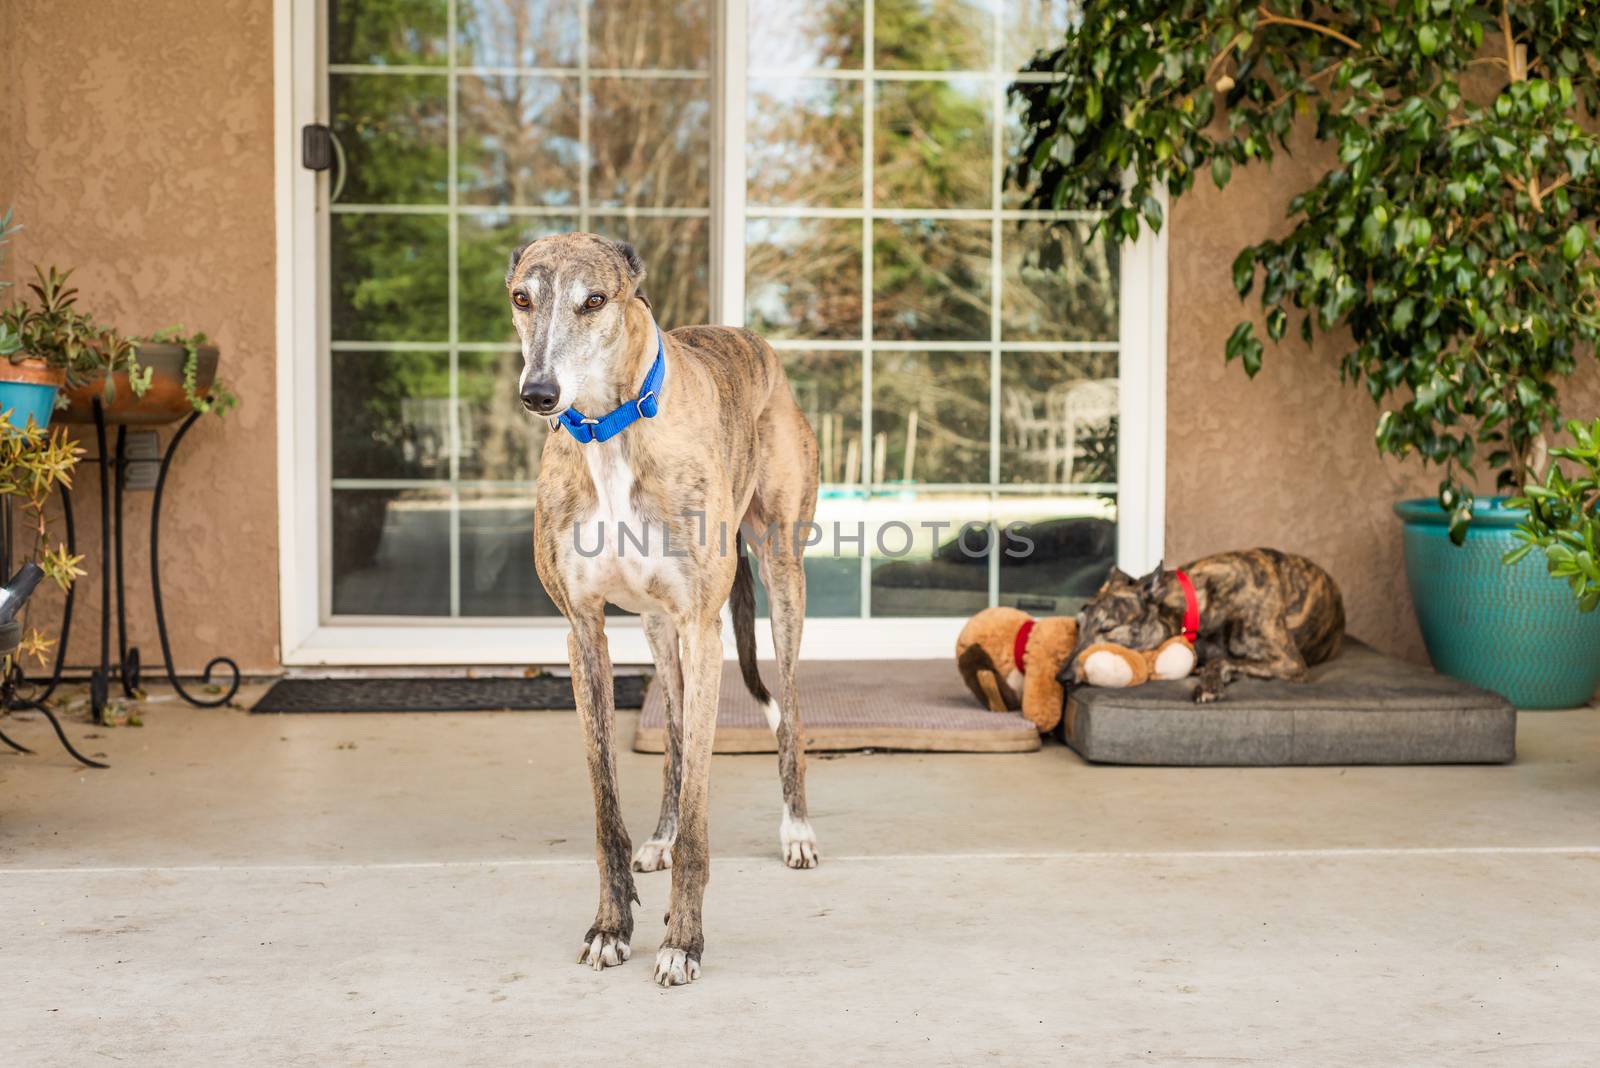 Two rescued Greyhounds (former blood dogs) in their adoptive home